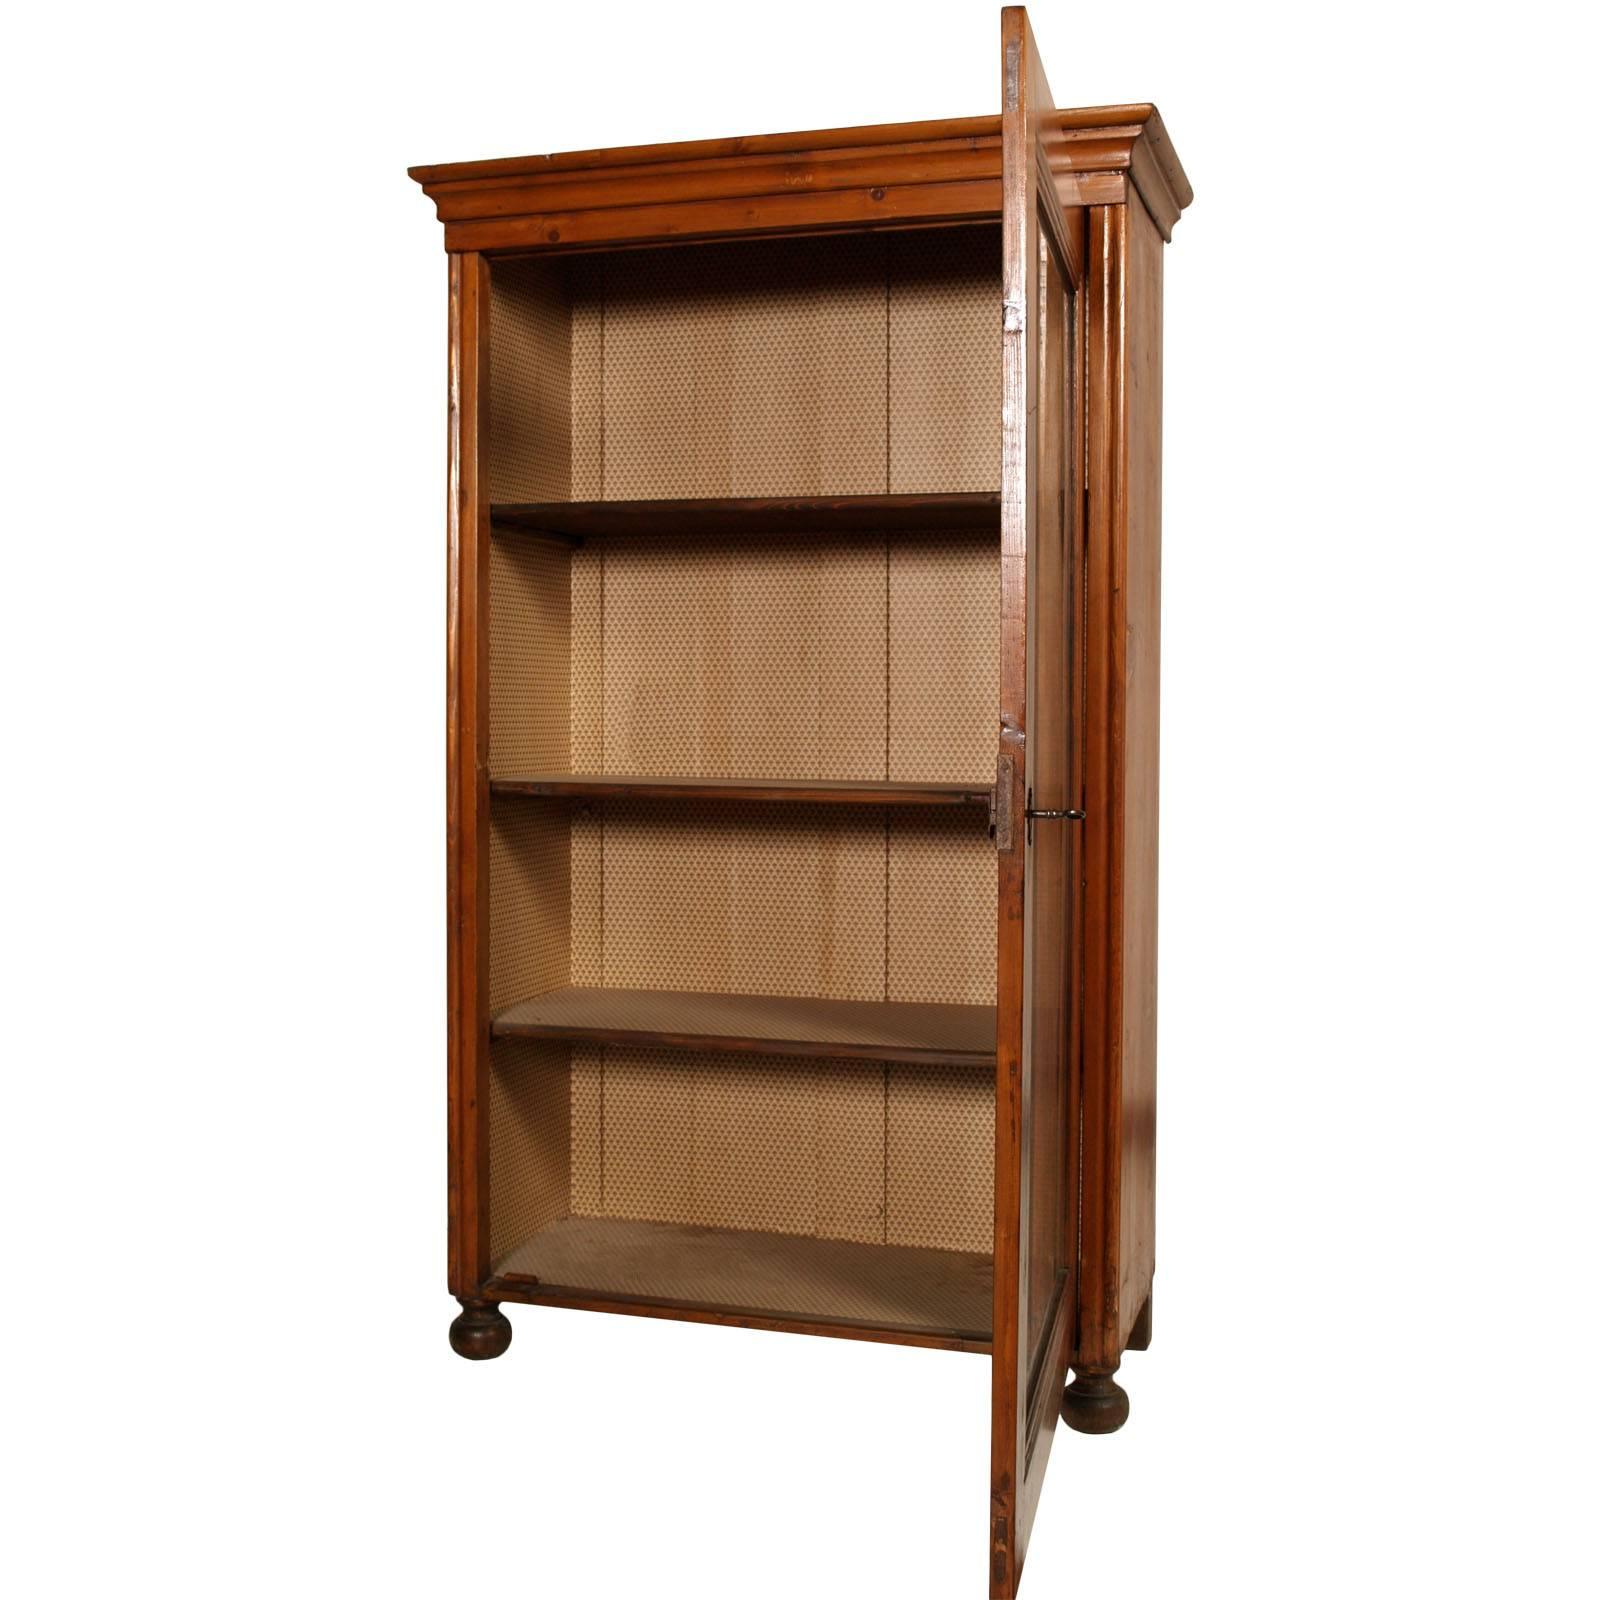 Original Italian late 19th century neoclassic bookcase in solid larch restored and wax polished.

Measures cm: H 180 x W 109 x D 53.